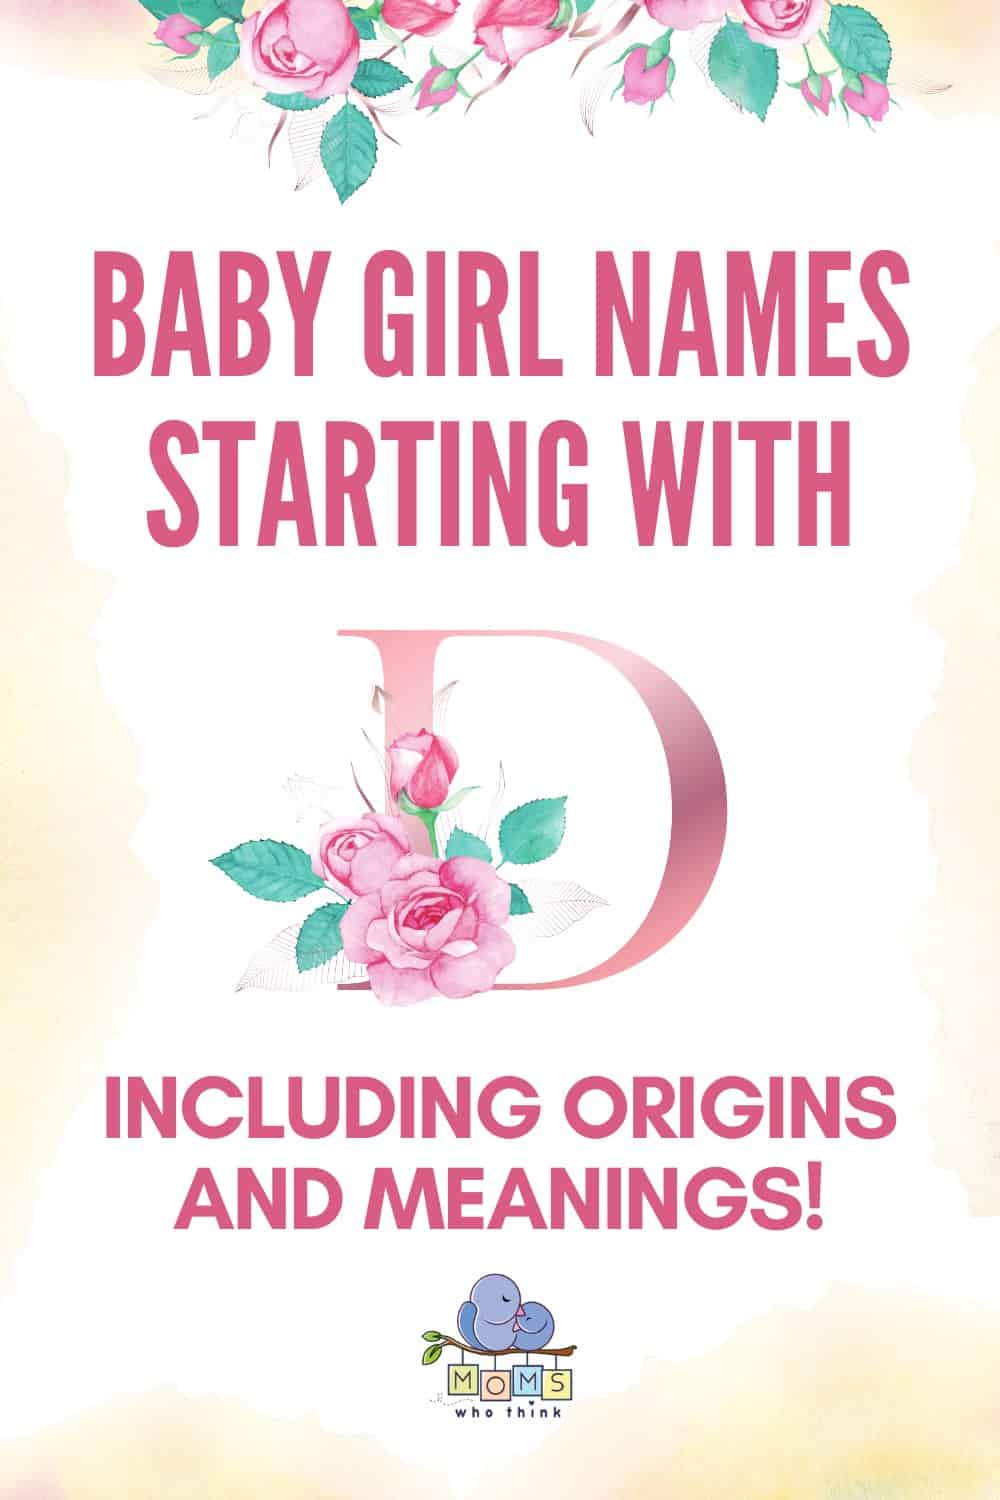 Baby girl names starting with D